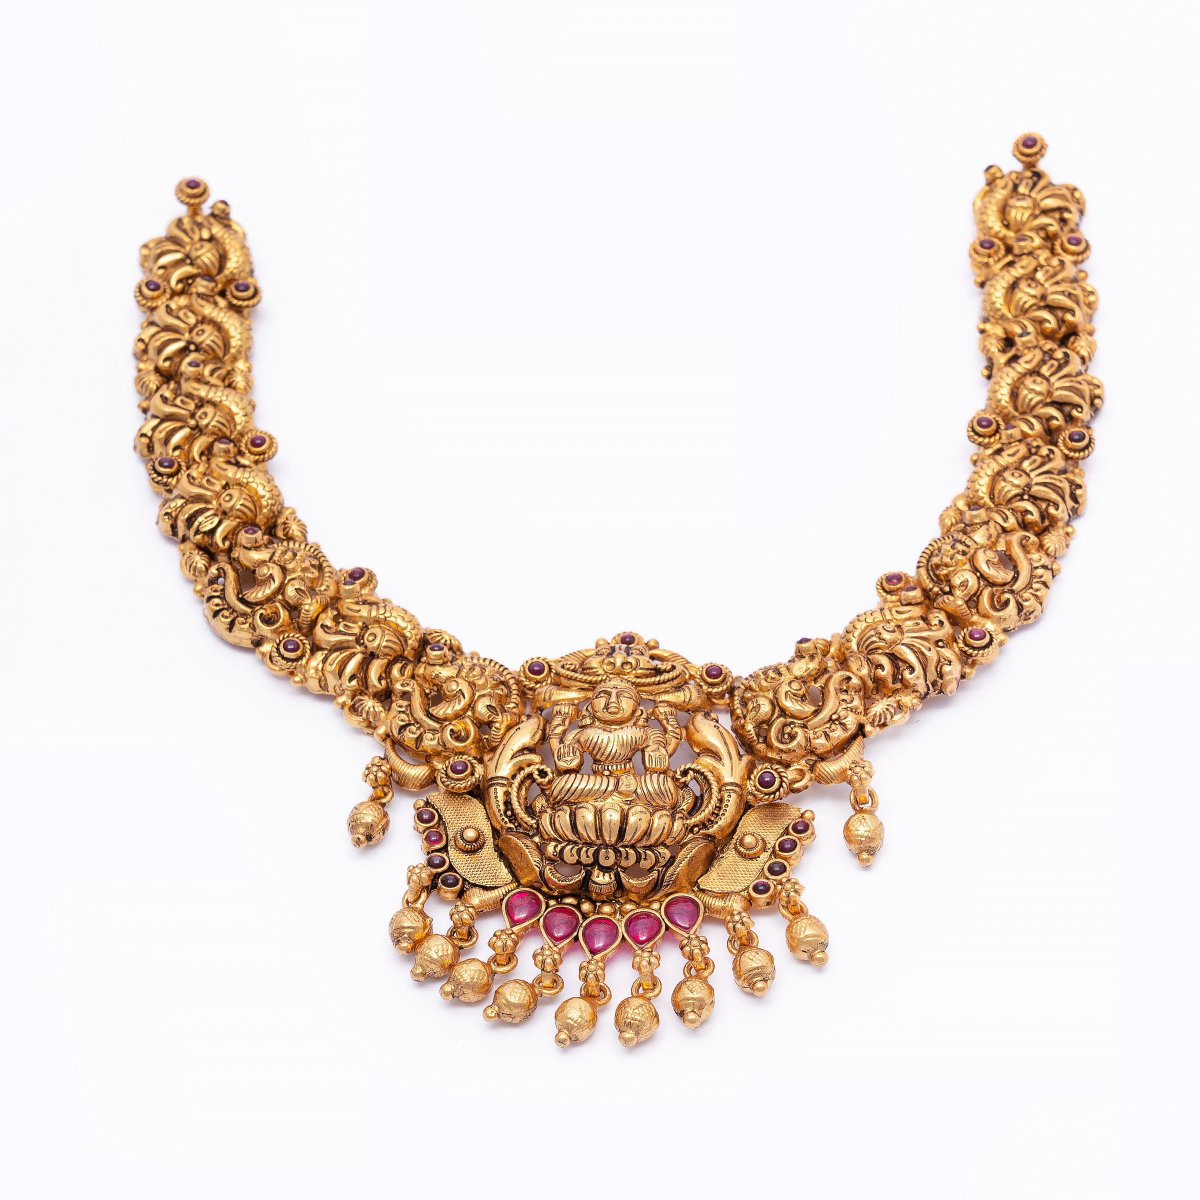 GOLD POLISHED SOUTH INDIAN TRADITIONAL NECKLACE FOR WOMEN 